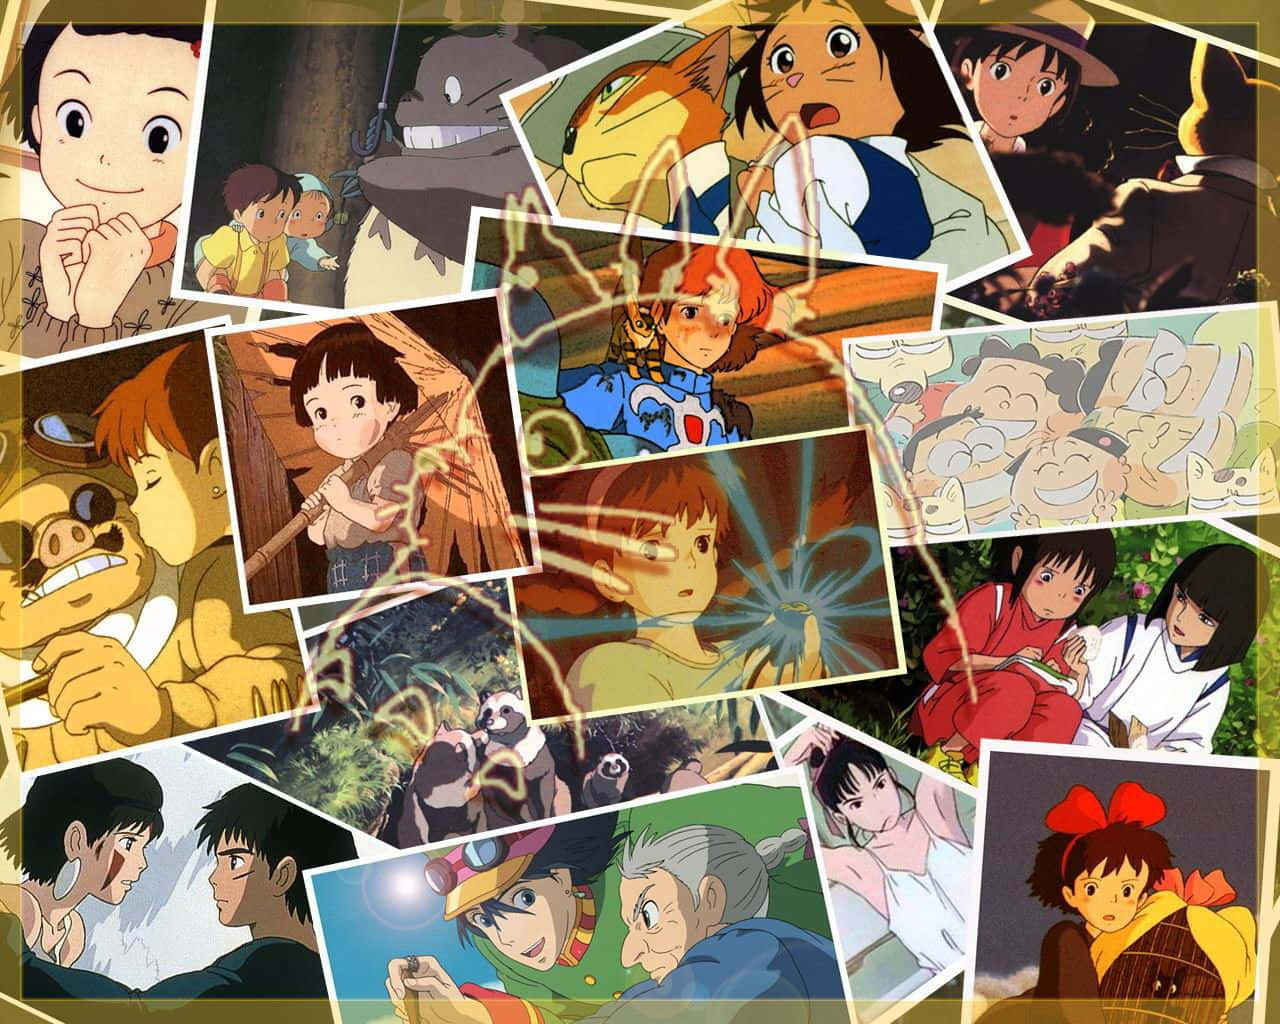 "An Aesthetic Desktop Surrounded by the Magic of Studio Ghibli" Wallpaper